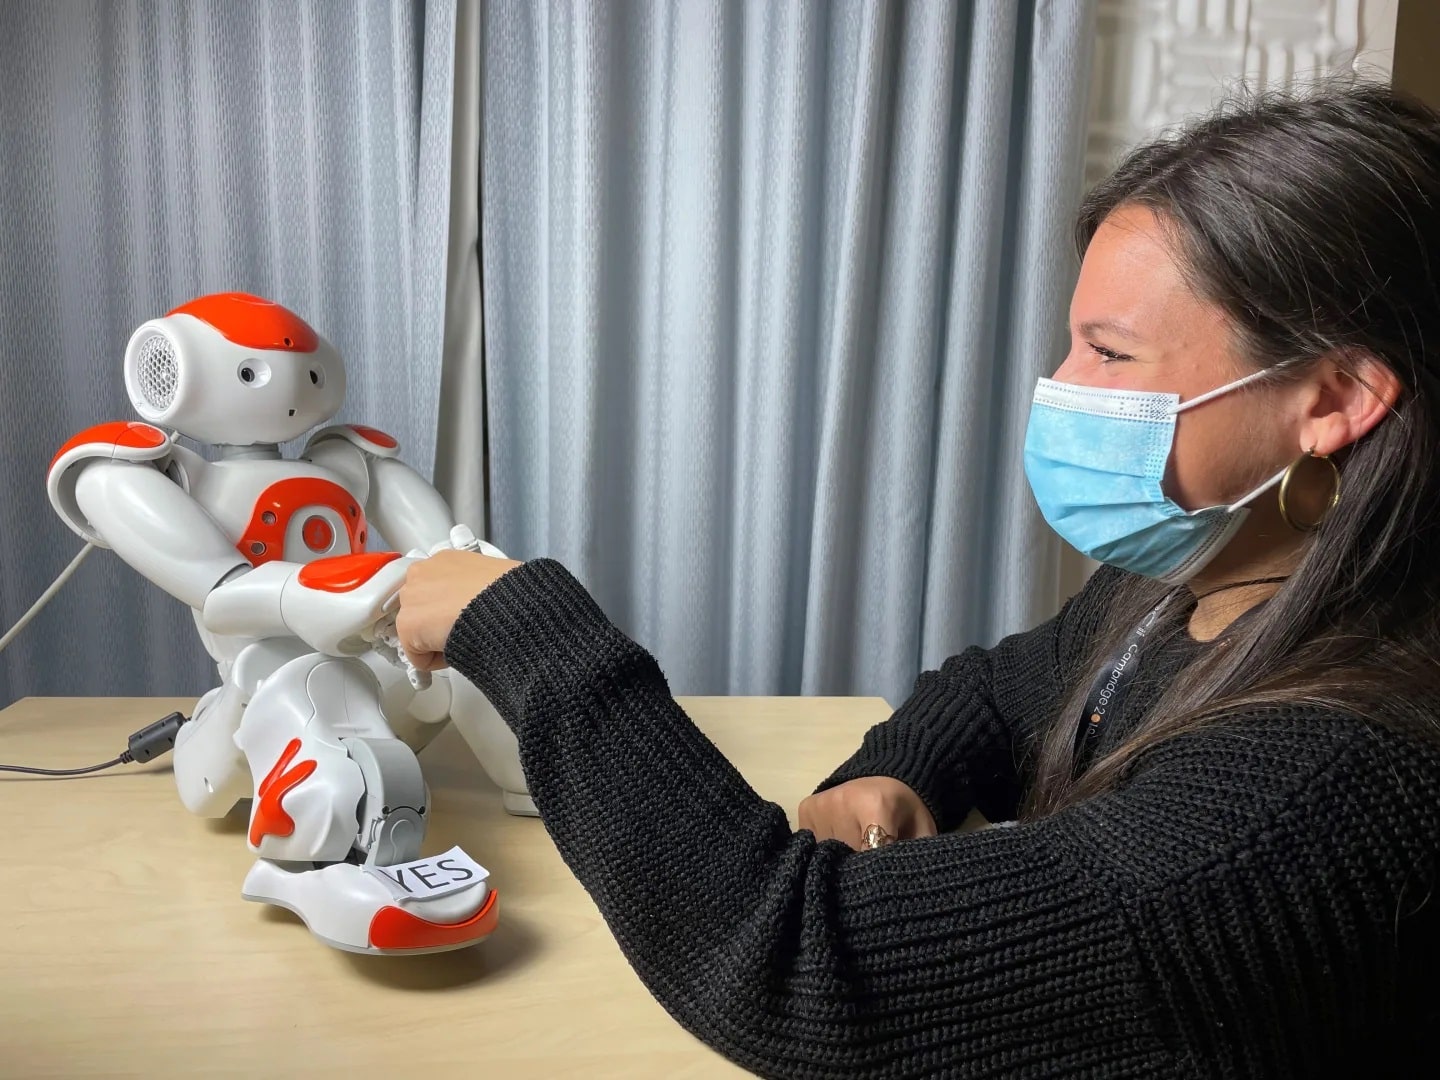 Co-author Dr Micol Spitale shaking hand with Nao humanoid robot.